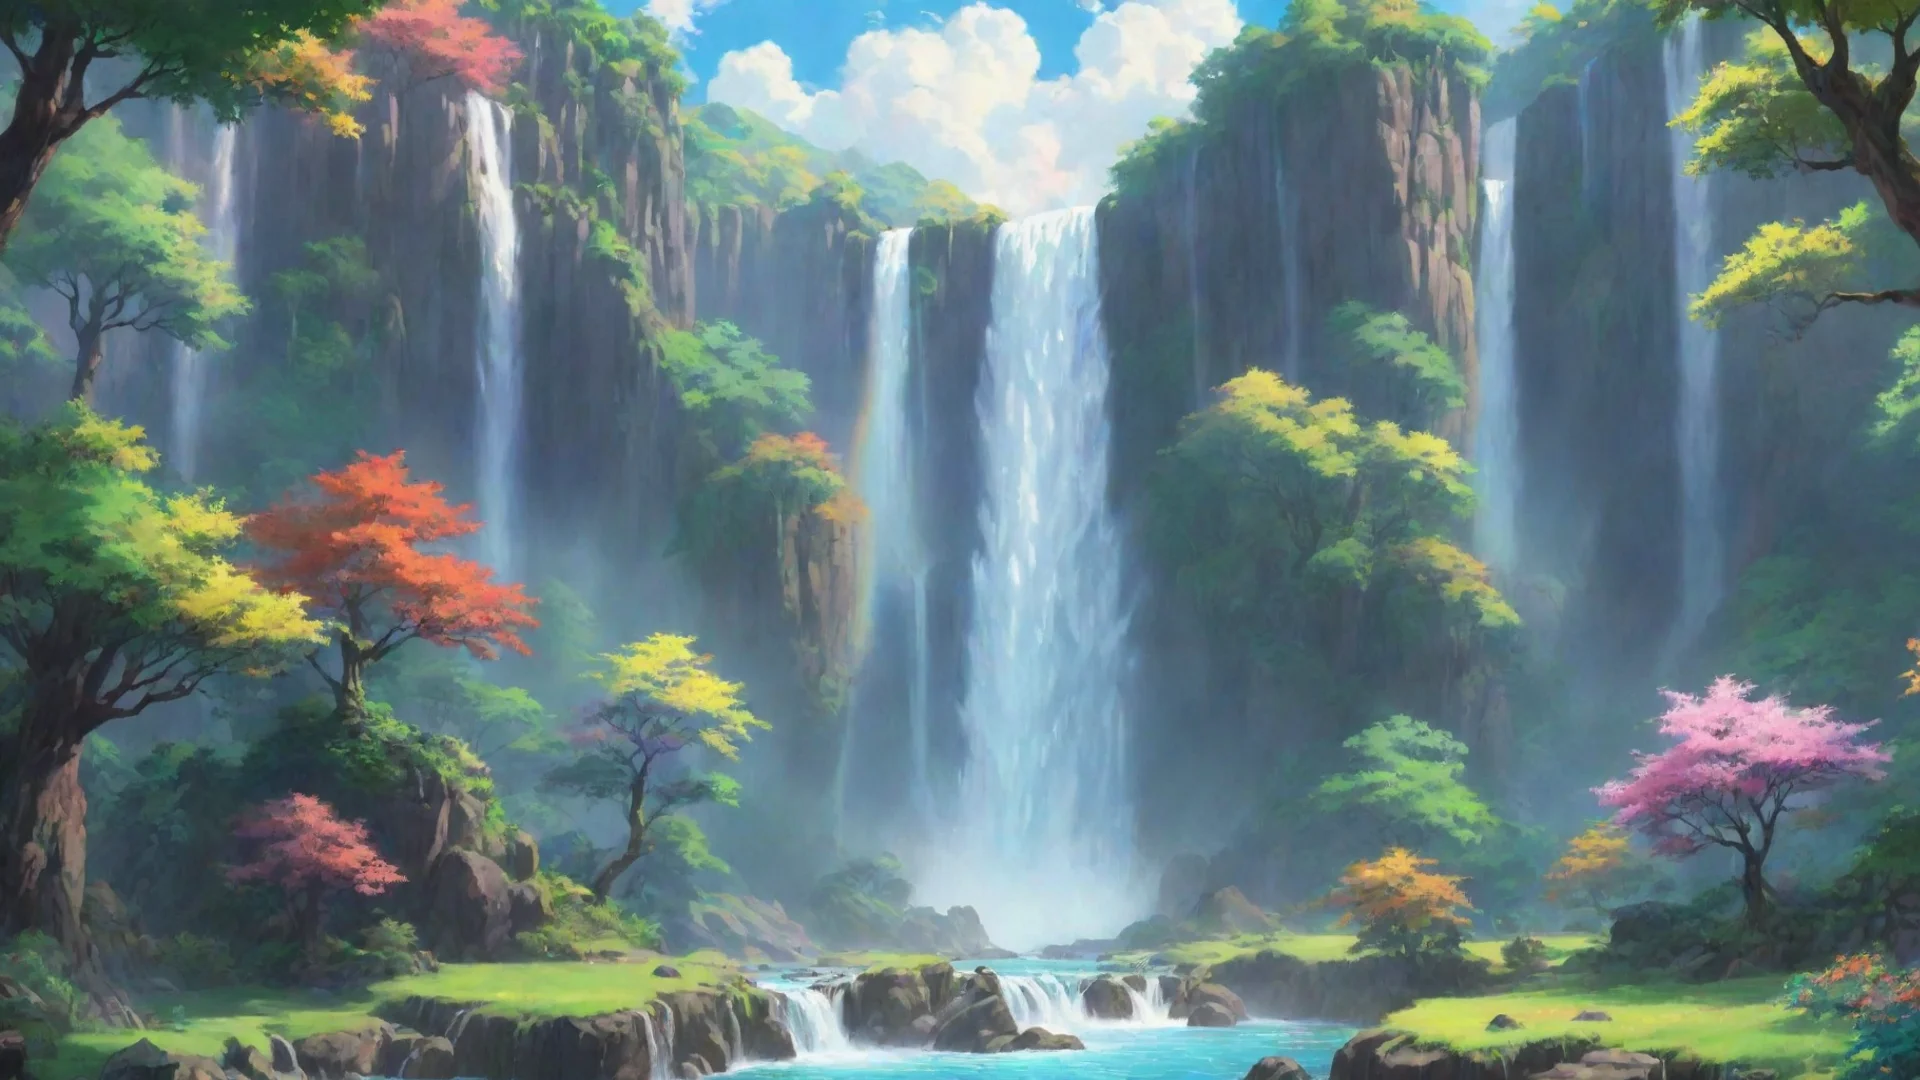 aiamazing lowfi relaxing calming on colorful chilling relaxing with lush wonderful environment waterfalls rainbows hd ghibli fantasy fantastic awesome portrait 2 wide